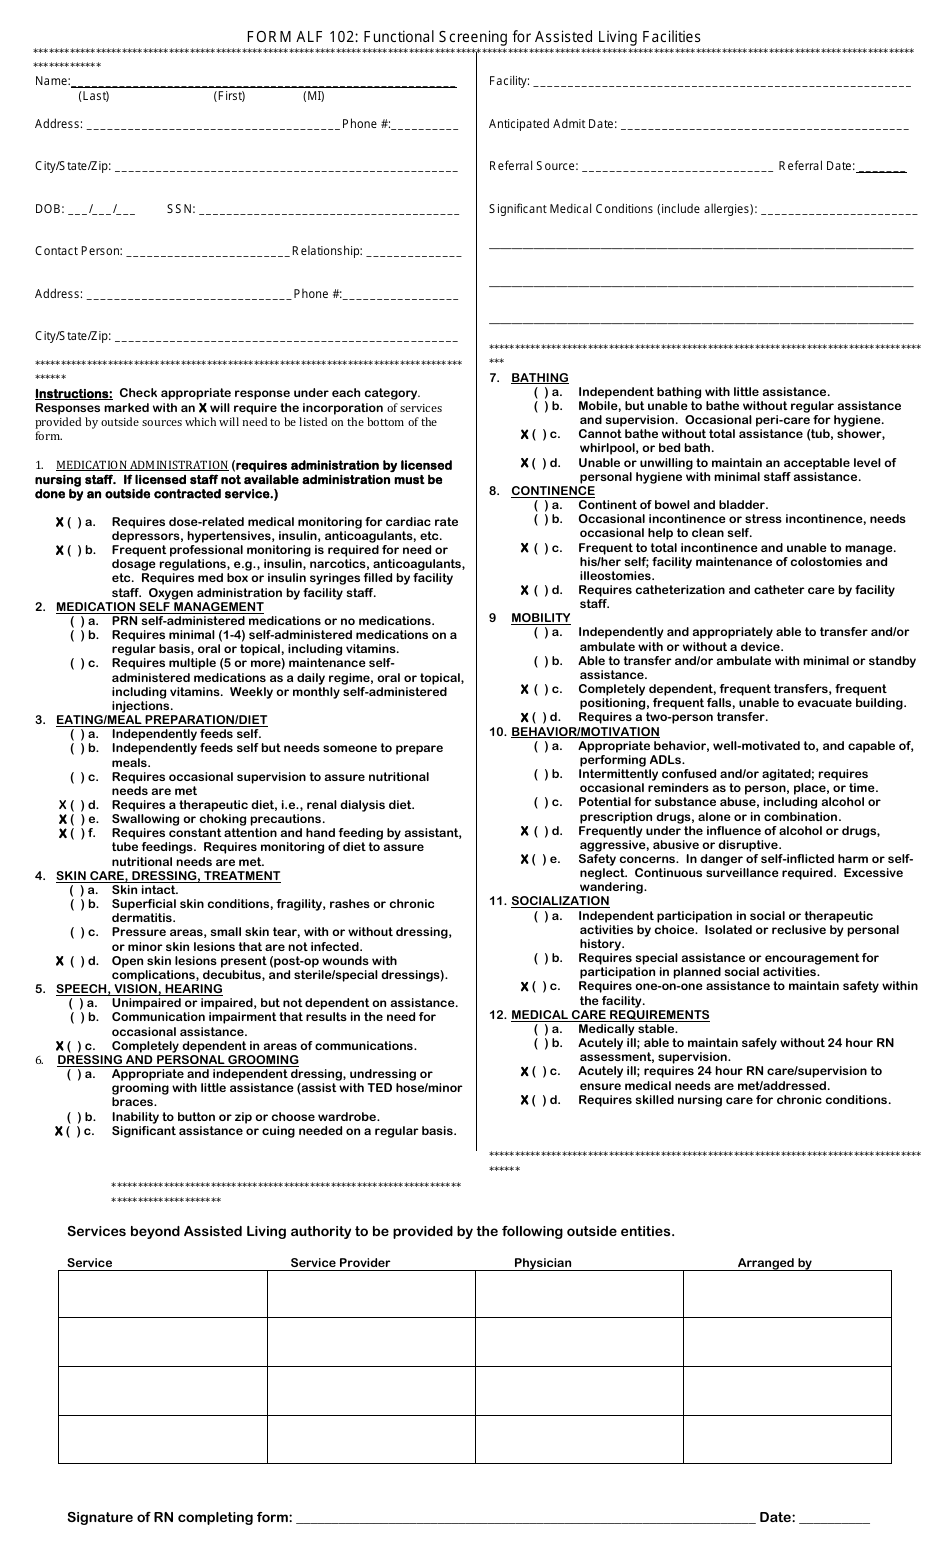 Form ALF102 Functional Screening for Assisted Living Facilities - Wyoming, Page 1